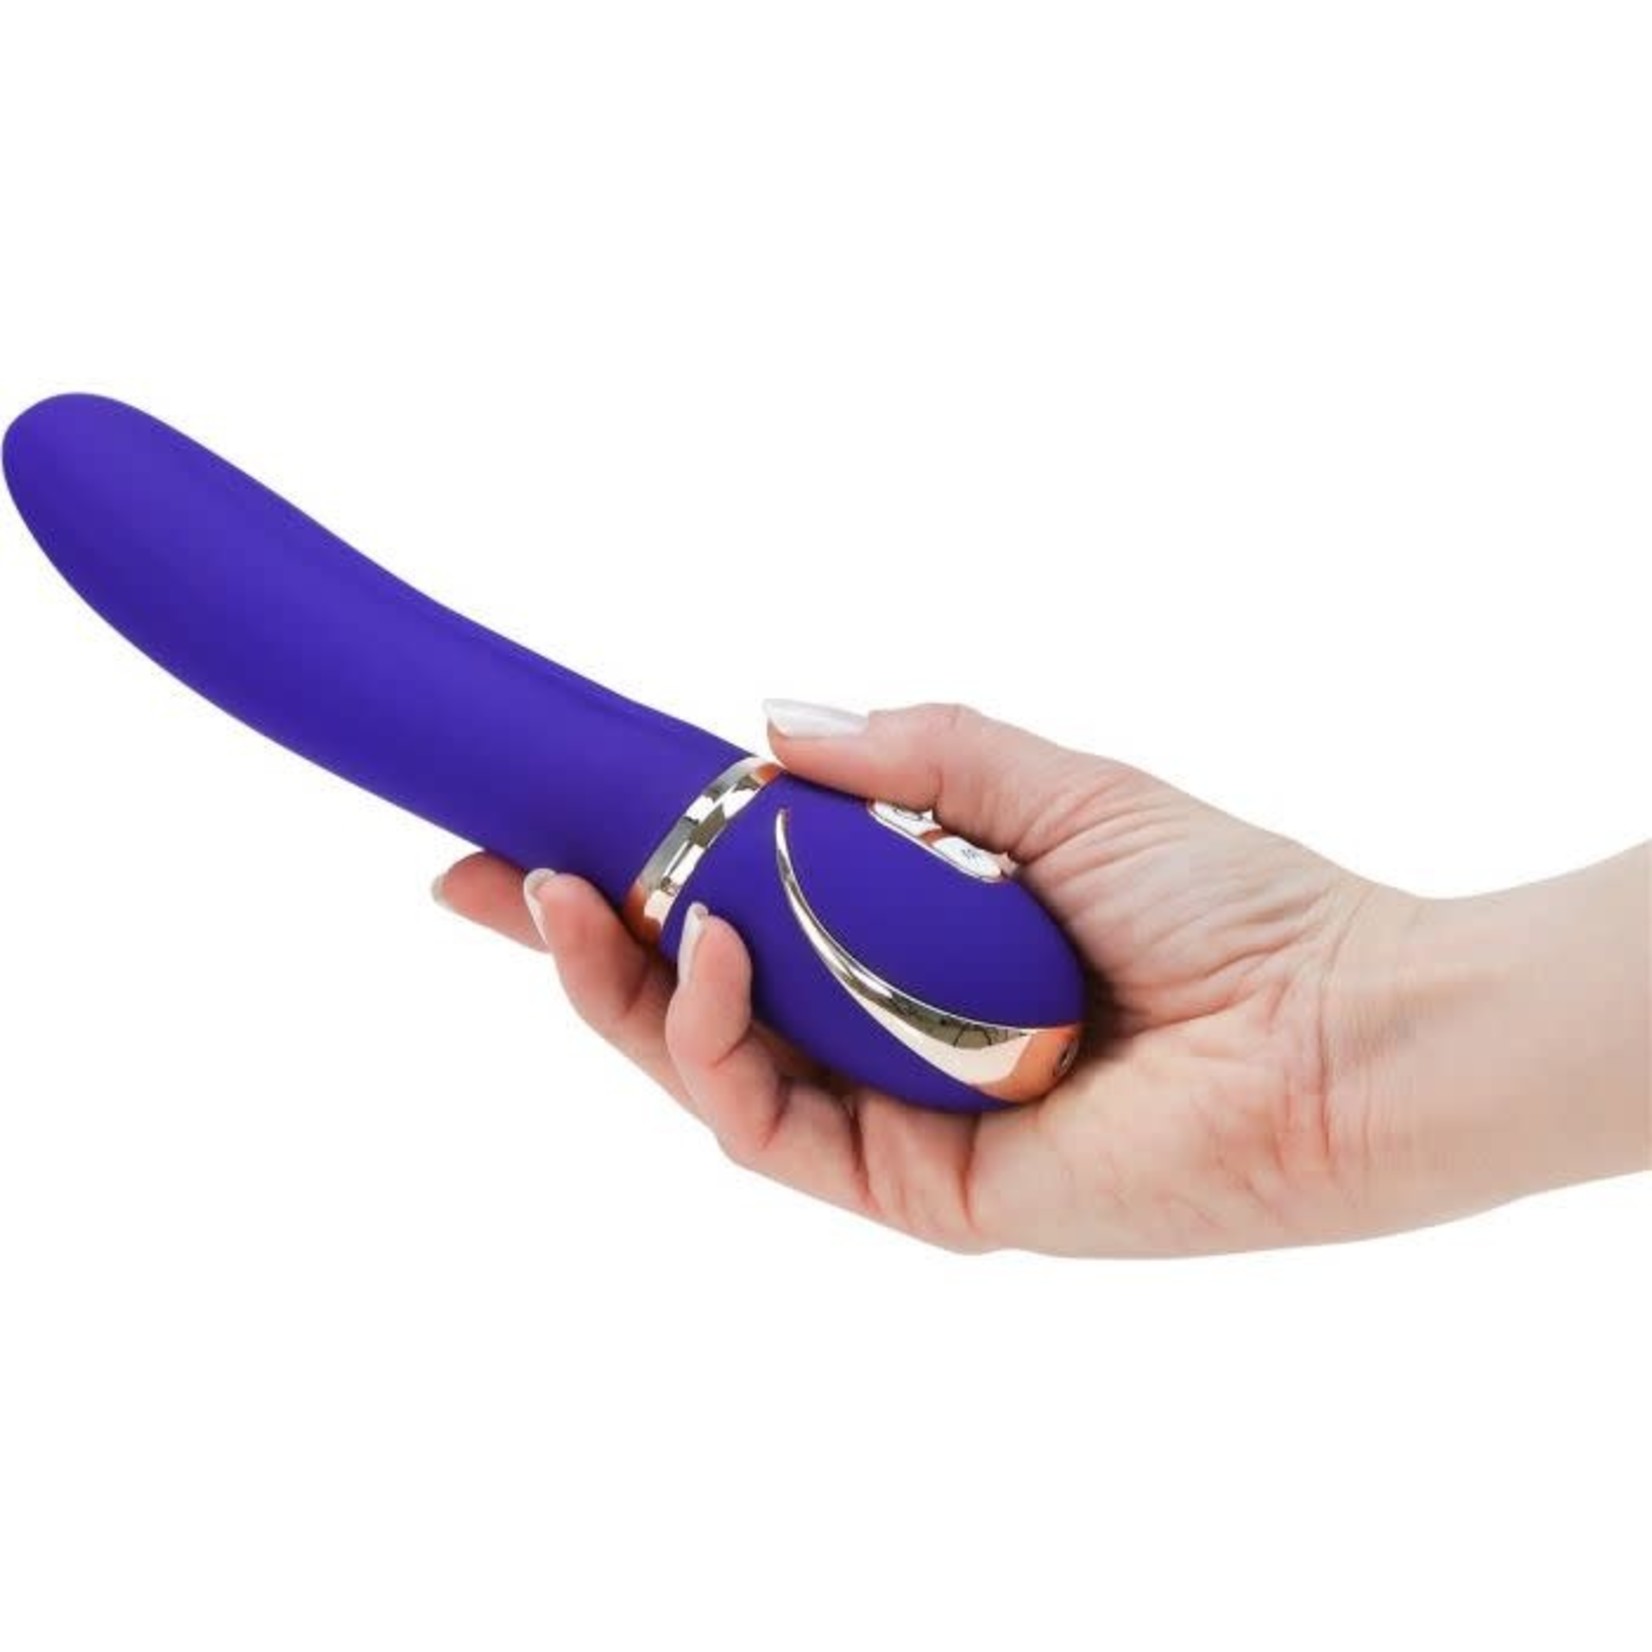 VIBE COUTURE GLAM UP RECHARGEABLE VIBRATOR - PURPLE